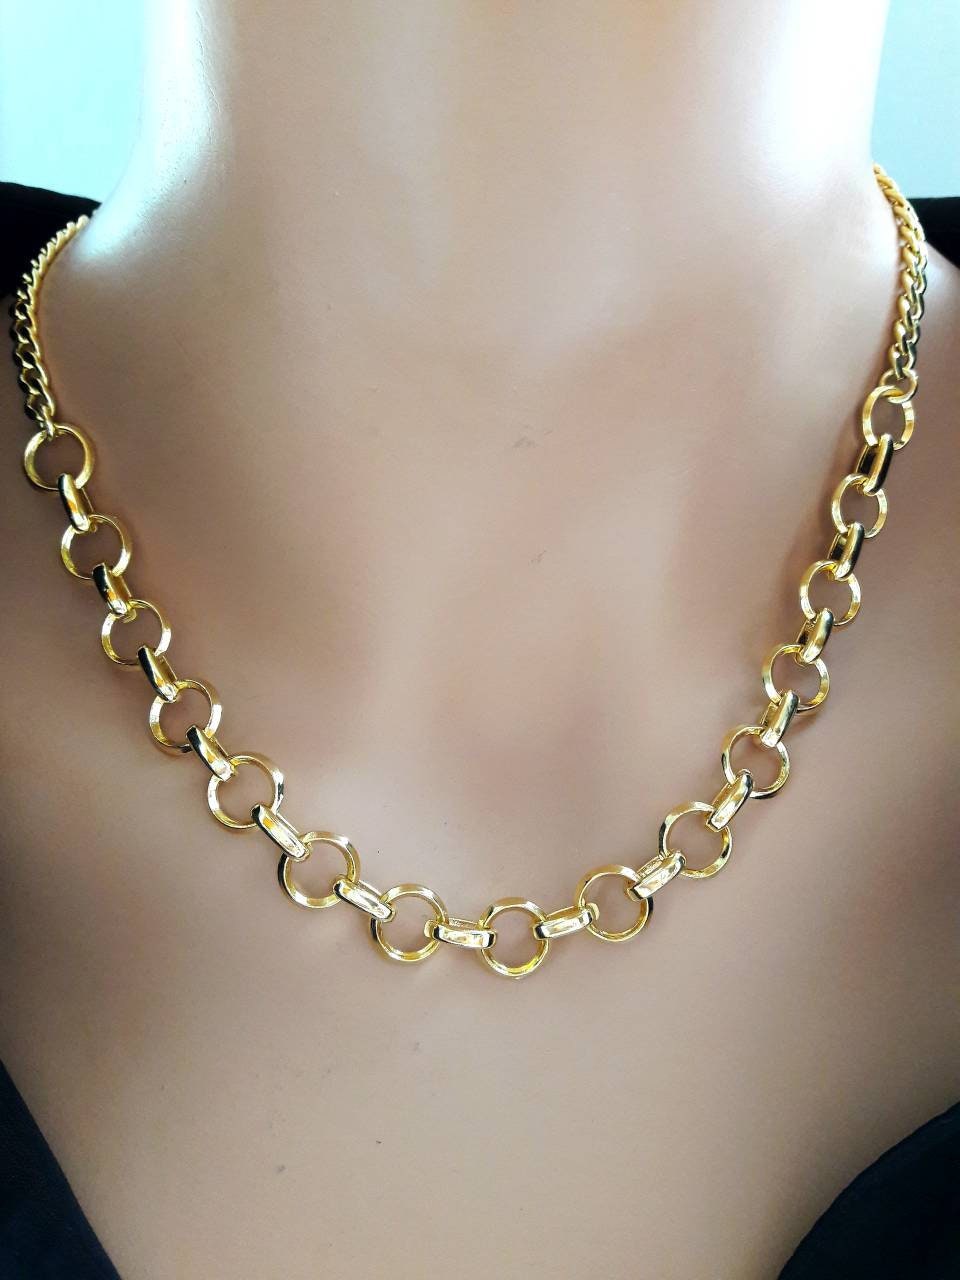 24k gold plated chain necklace gold statement necklace | Etsy